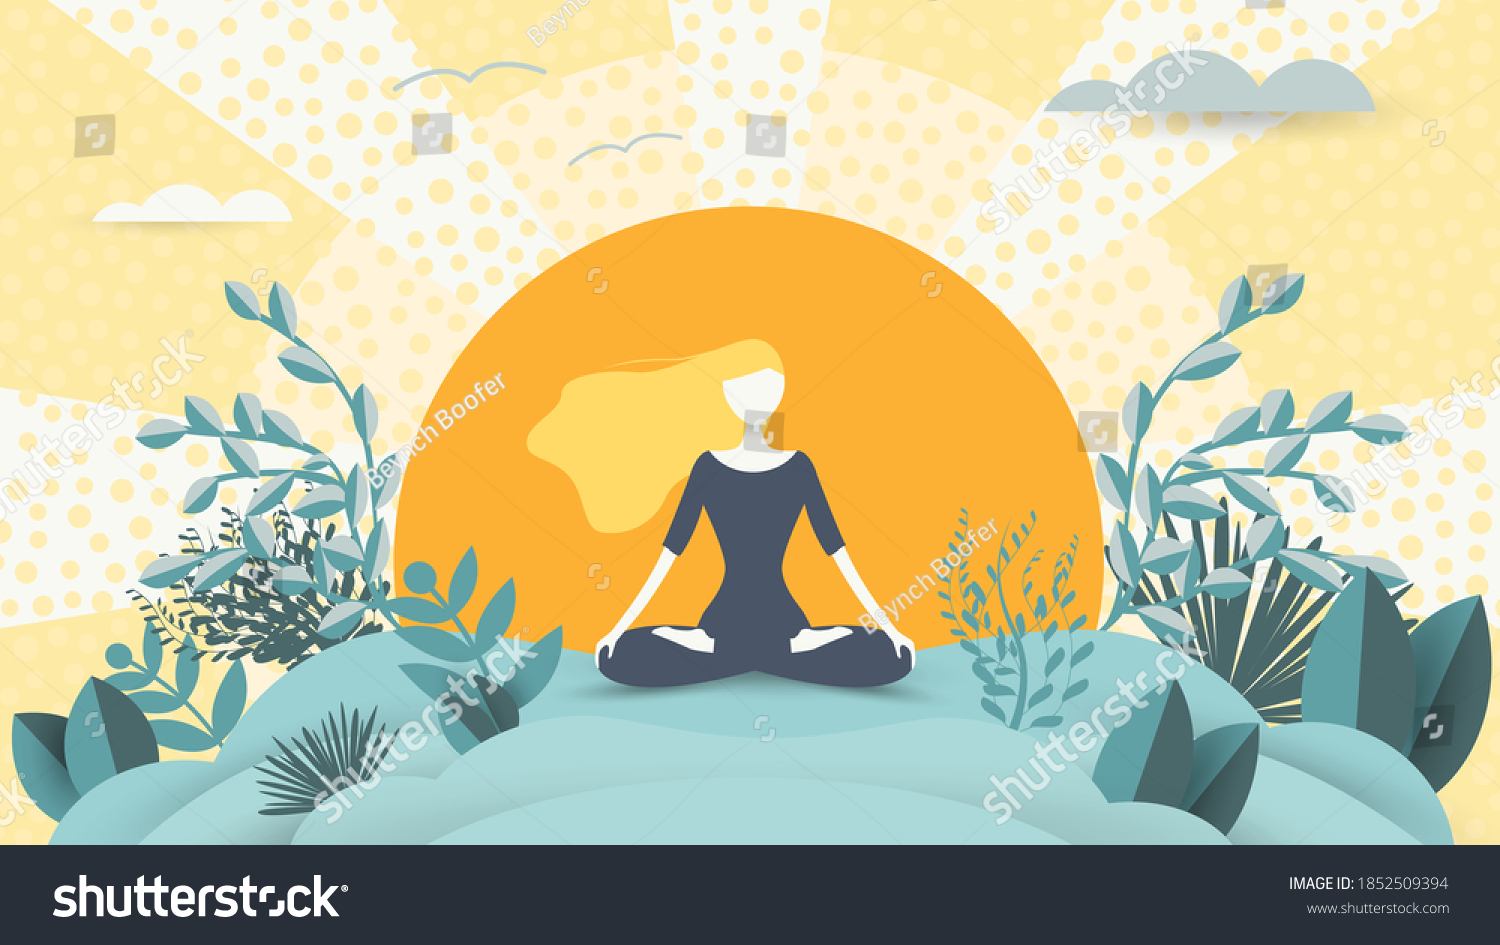 Spiritual therapy for body and mind with harmony yoga vector illustration. Wellness and health in nature. Mentally calm girl on the background of the sun. Balance and serenity of mind and body #1852509394